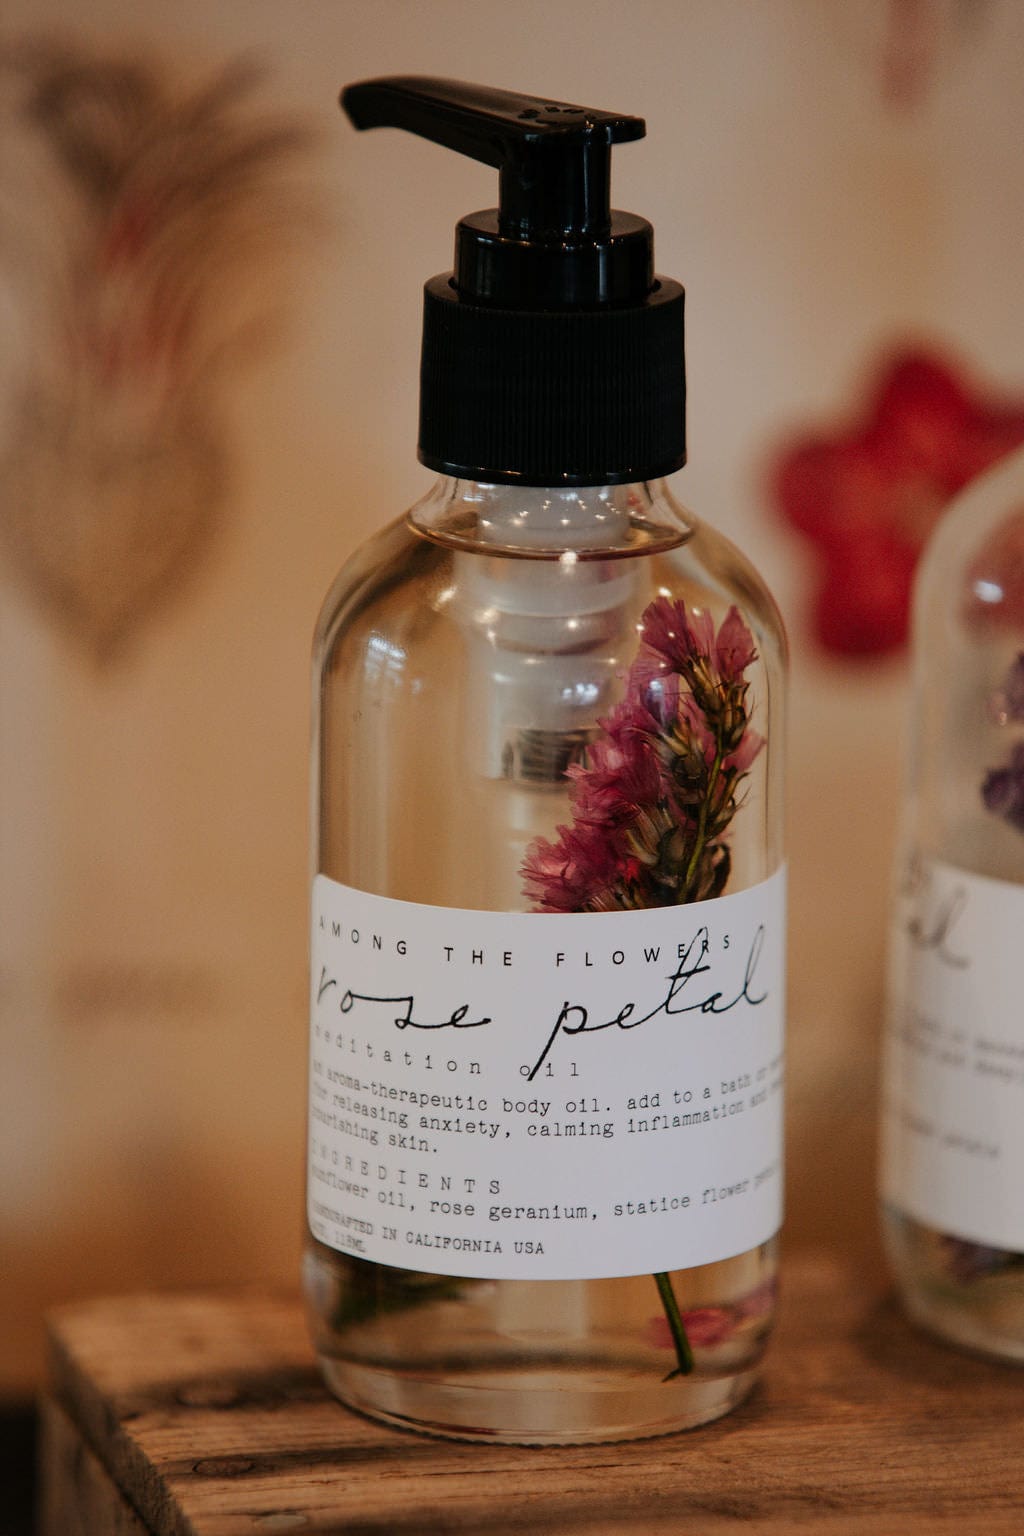 Among the Flowers Personal Care Rose Petal Body Oil